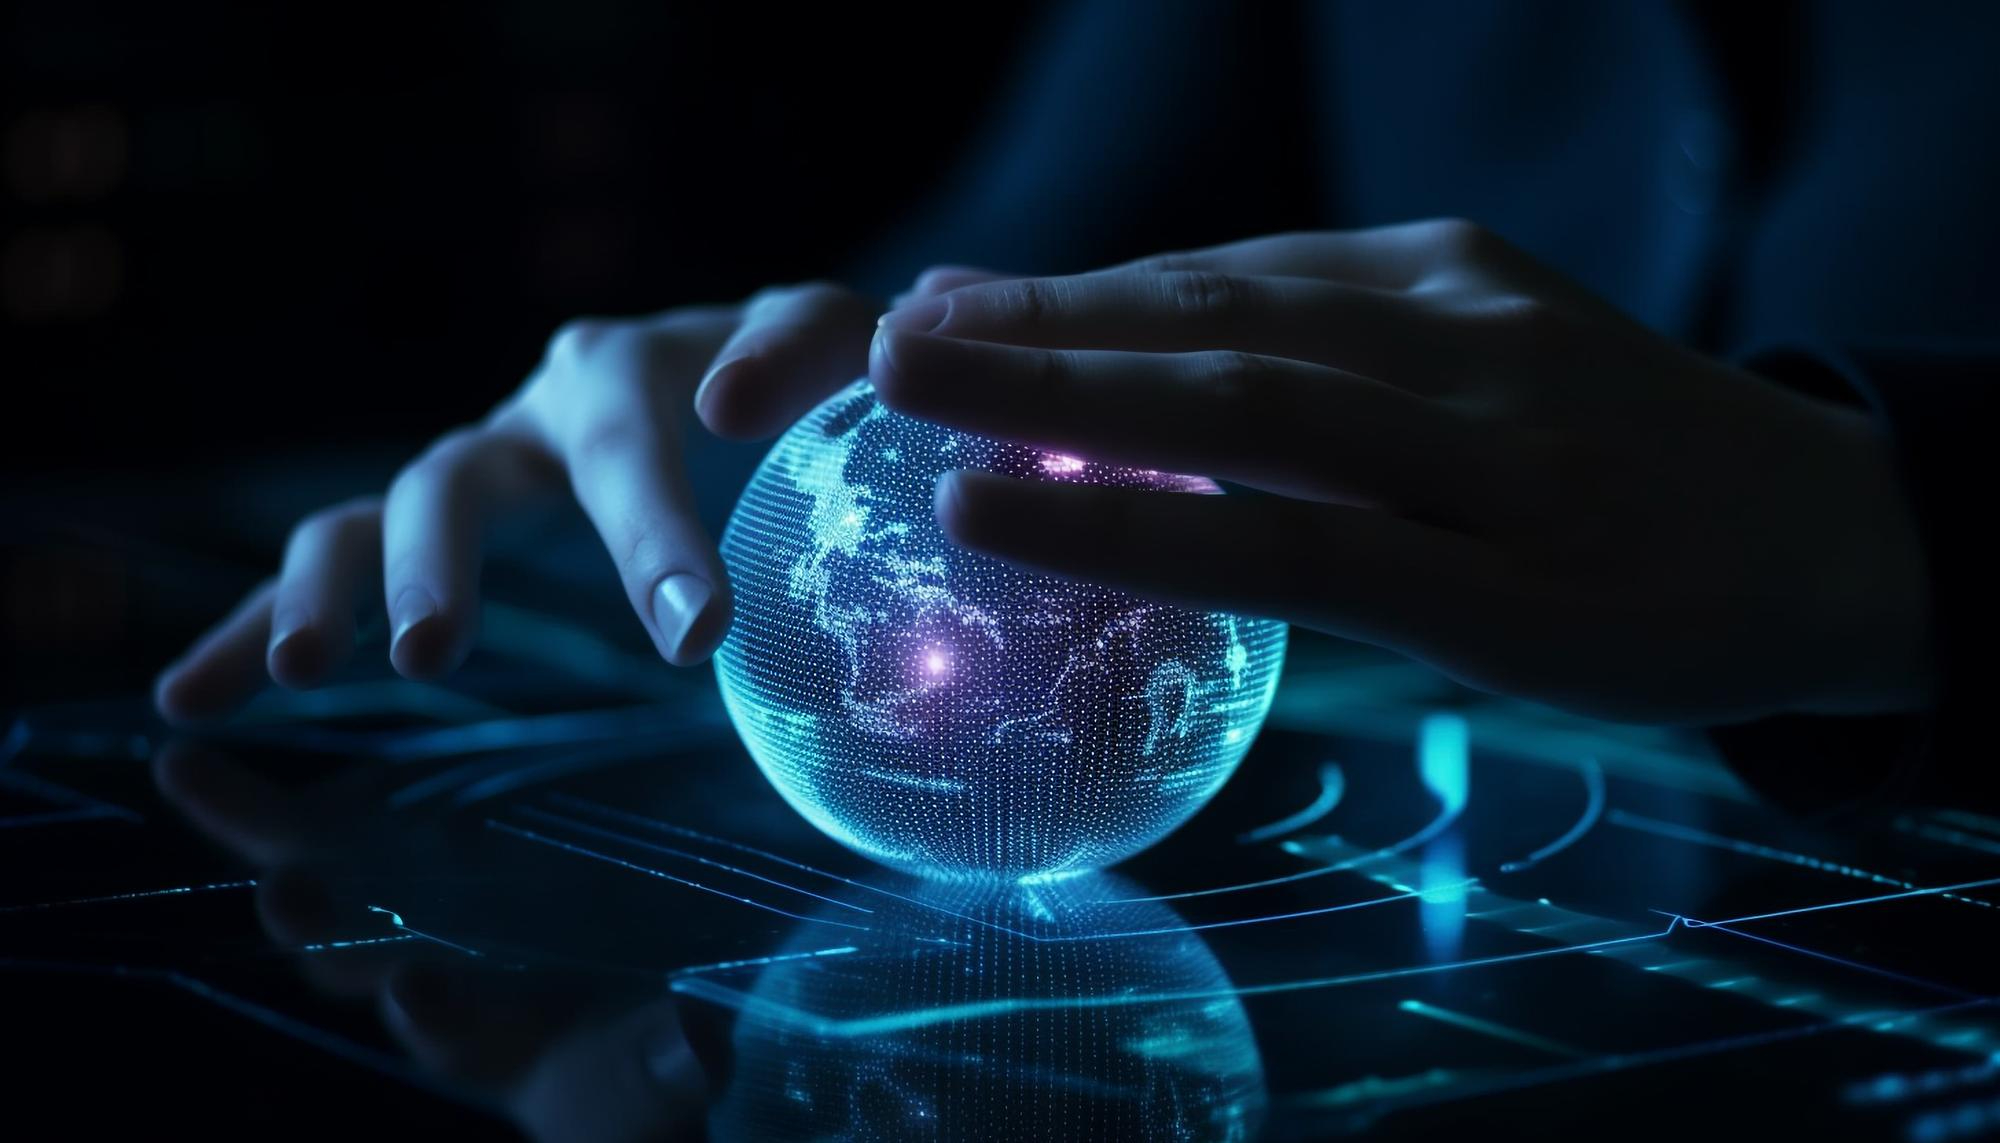 Person's hands gently touching a glowing digital globe representing global connectivity or technology network